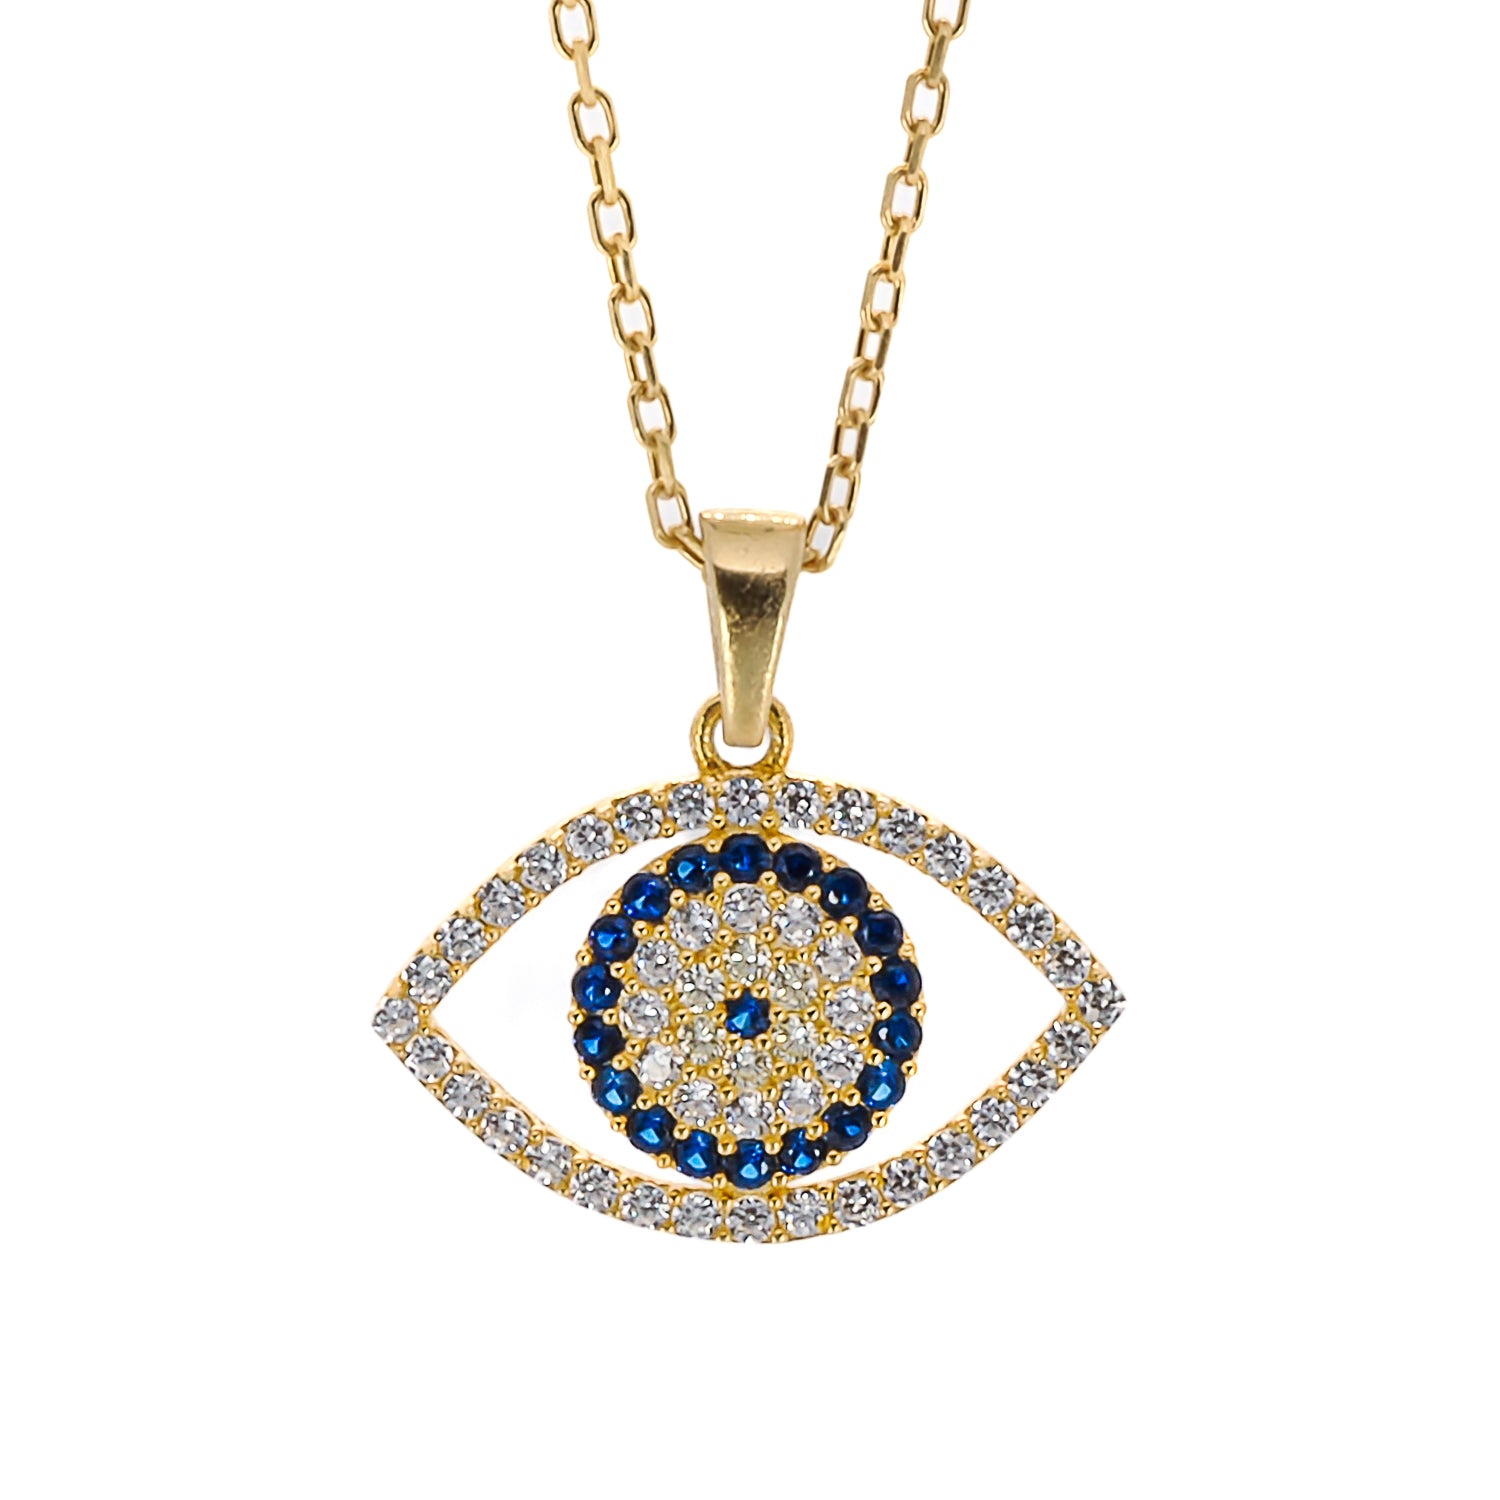 The evil eye is beautifully adorned with CZ diamonds, carefully set in a way that creates a dazzling display of sparkle and light.